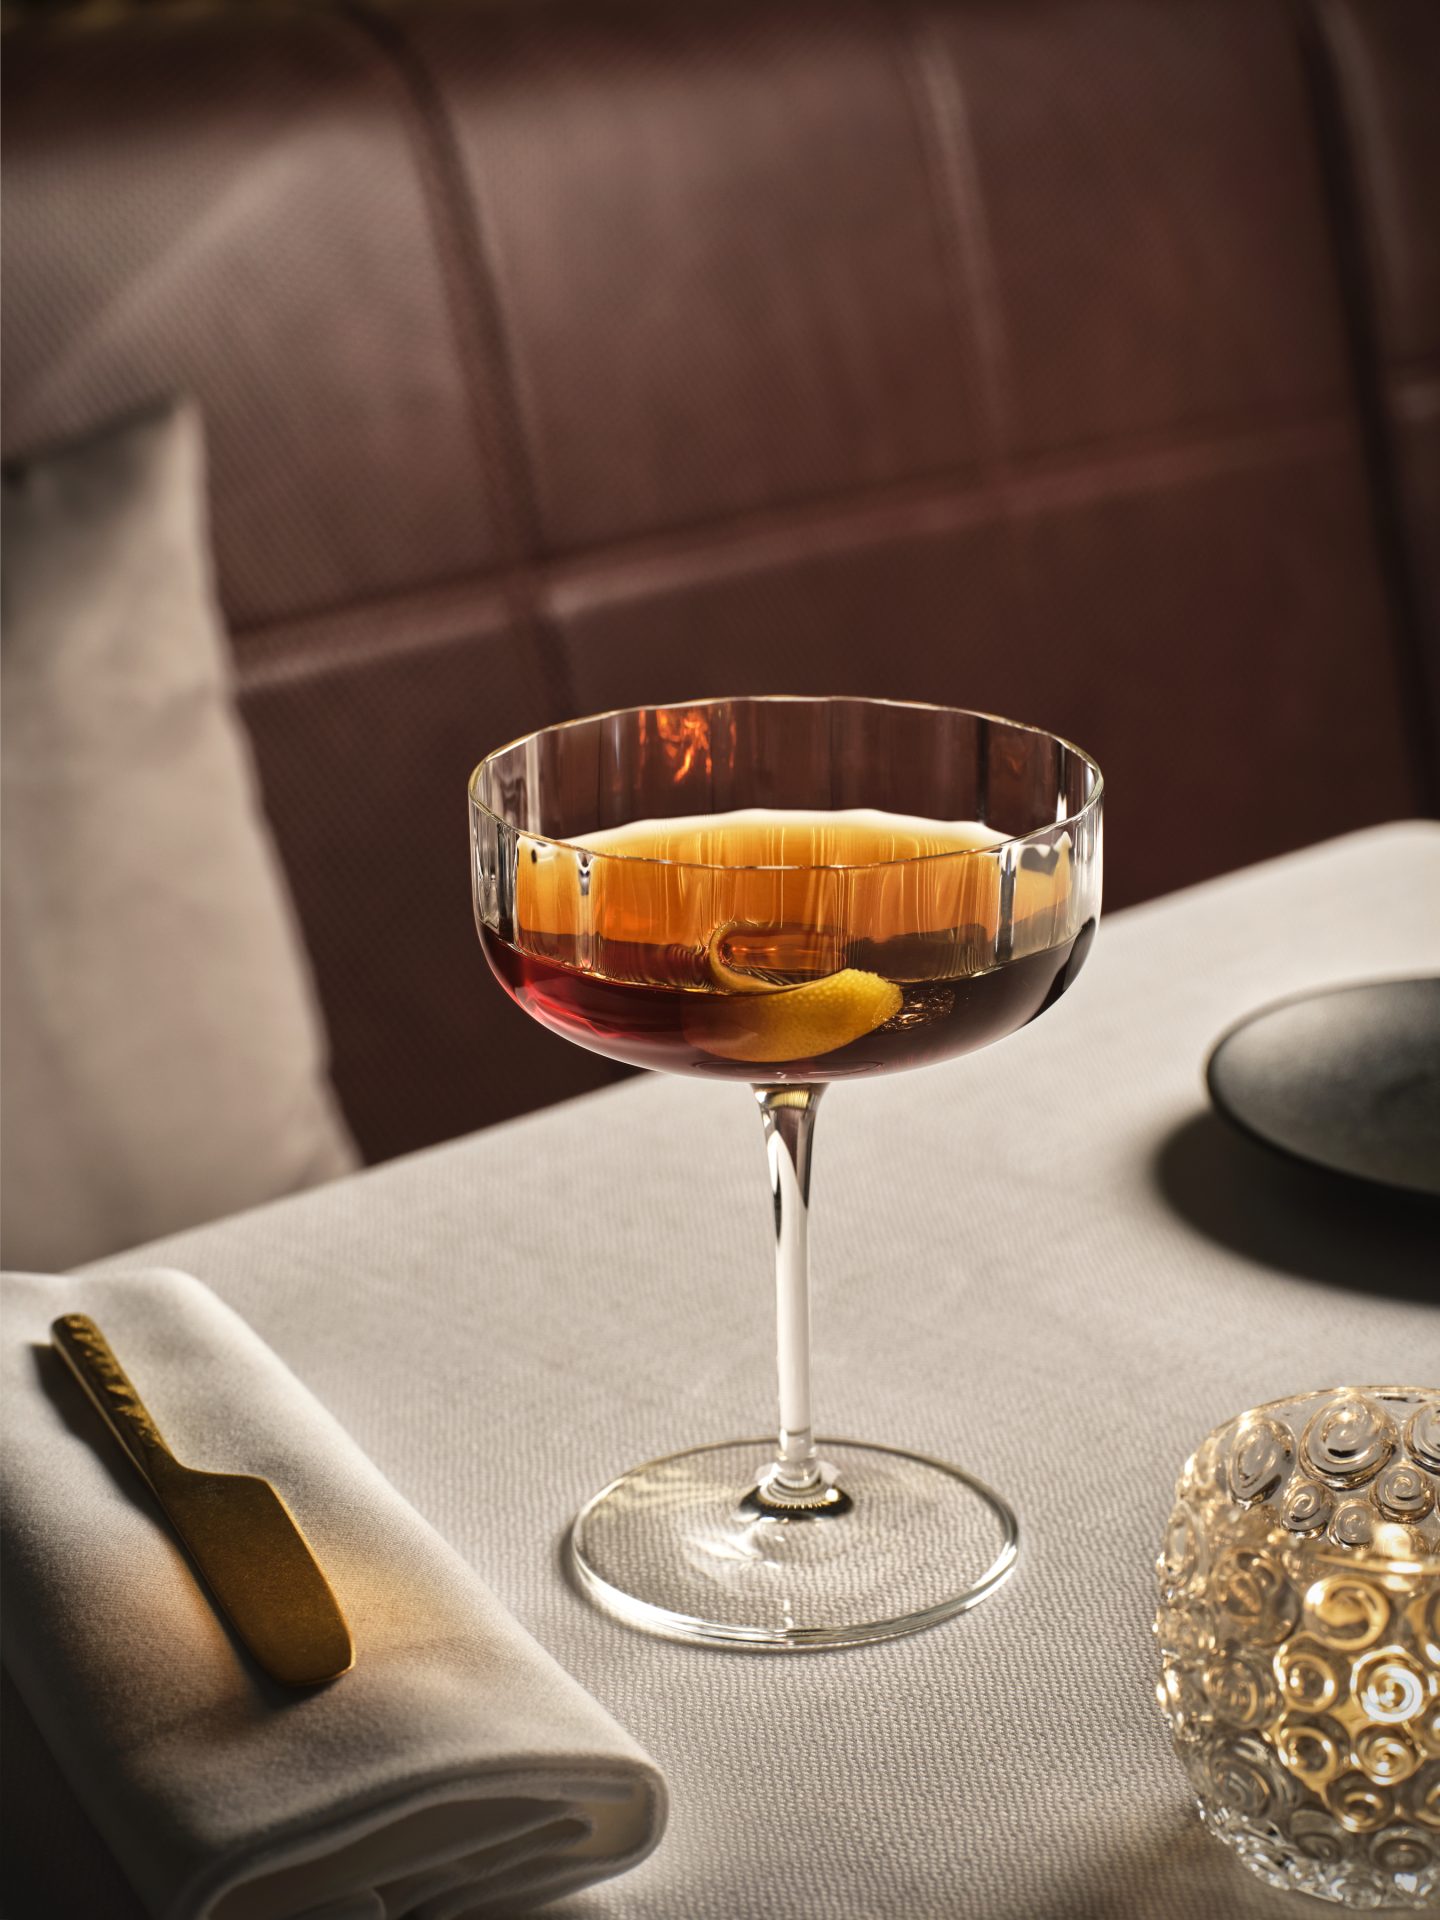 Iconic cocktails are the focus of the New York styled dinner at Rivington Cucina New York Restaurant in Milan